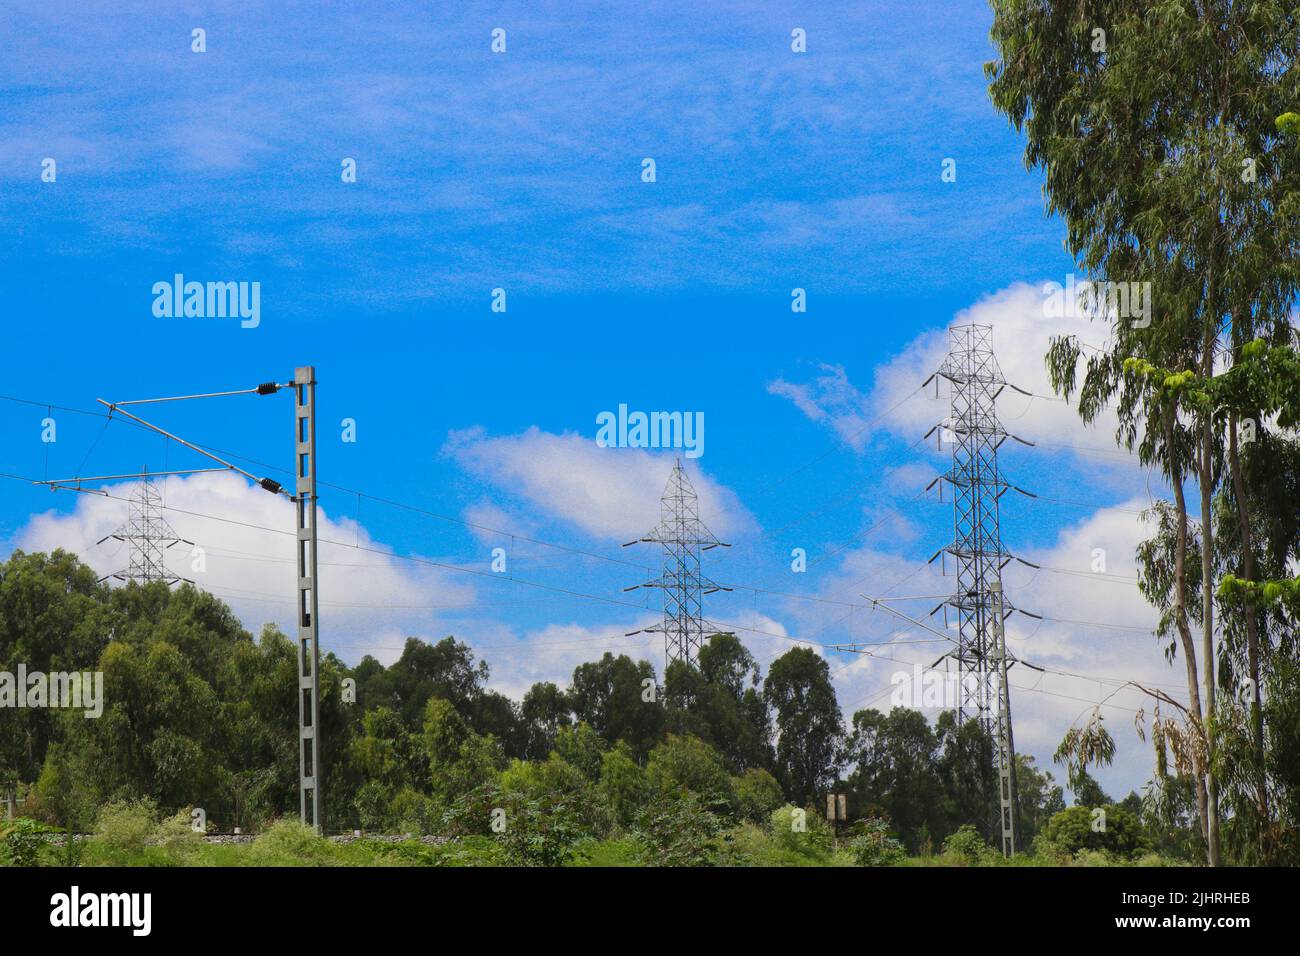 Electricity pole or electric post running through forests along with a view of electric train catenary against sky background Stock Photo